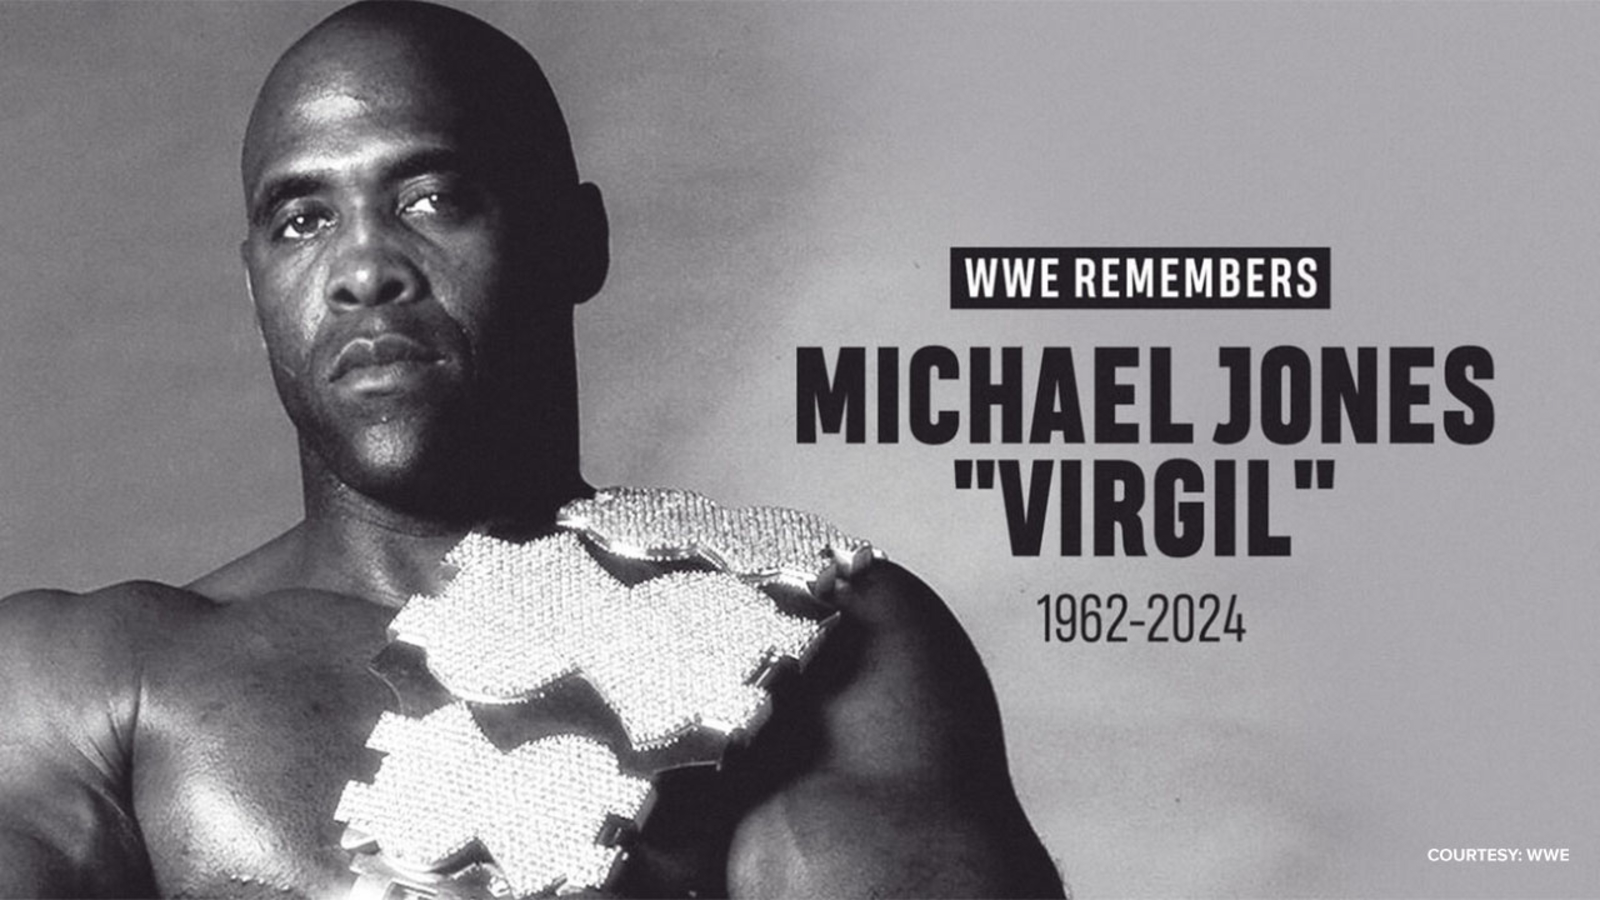 Virgil WWE: Pro wrestler best known for working with Ted DiBiase’s Millionaire Inc. in WWF dies at 61 [Video]